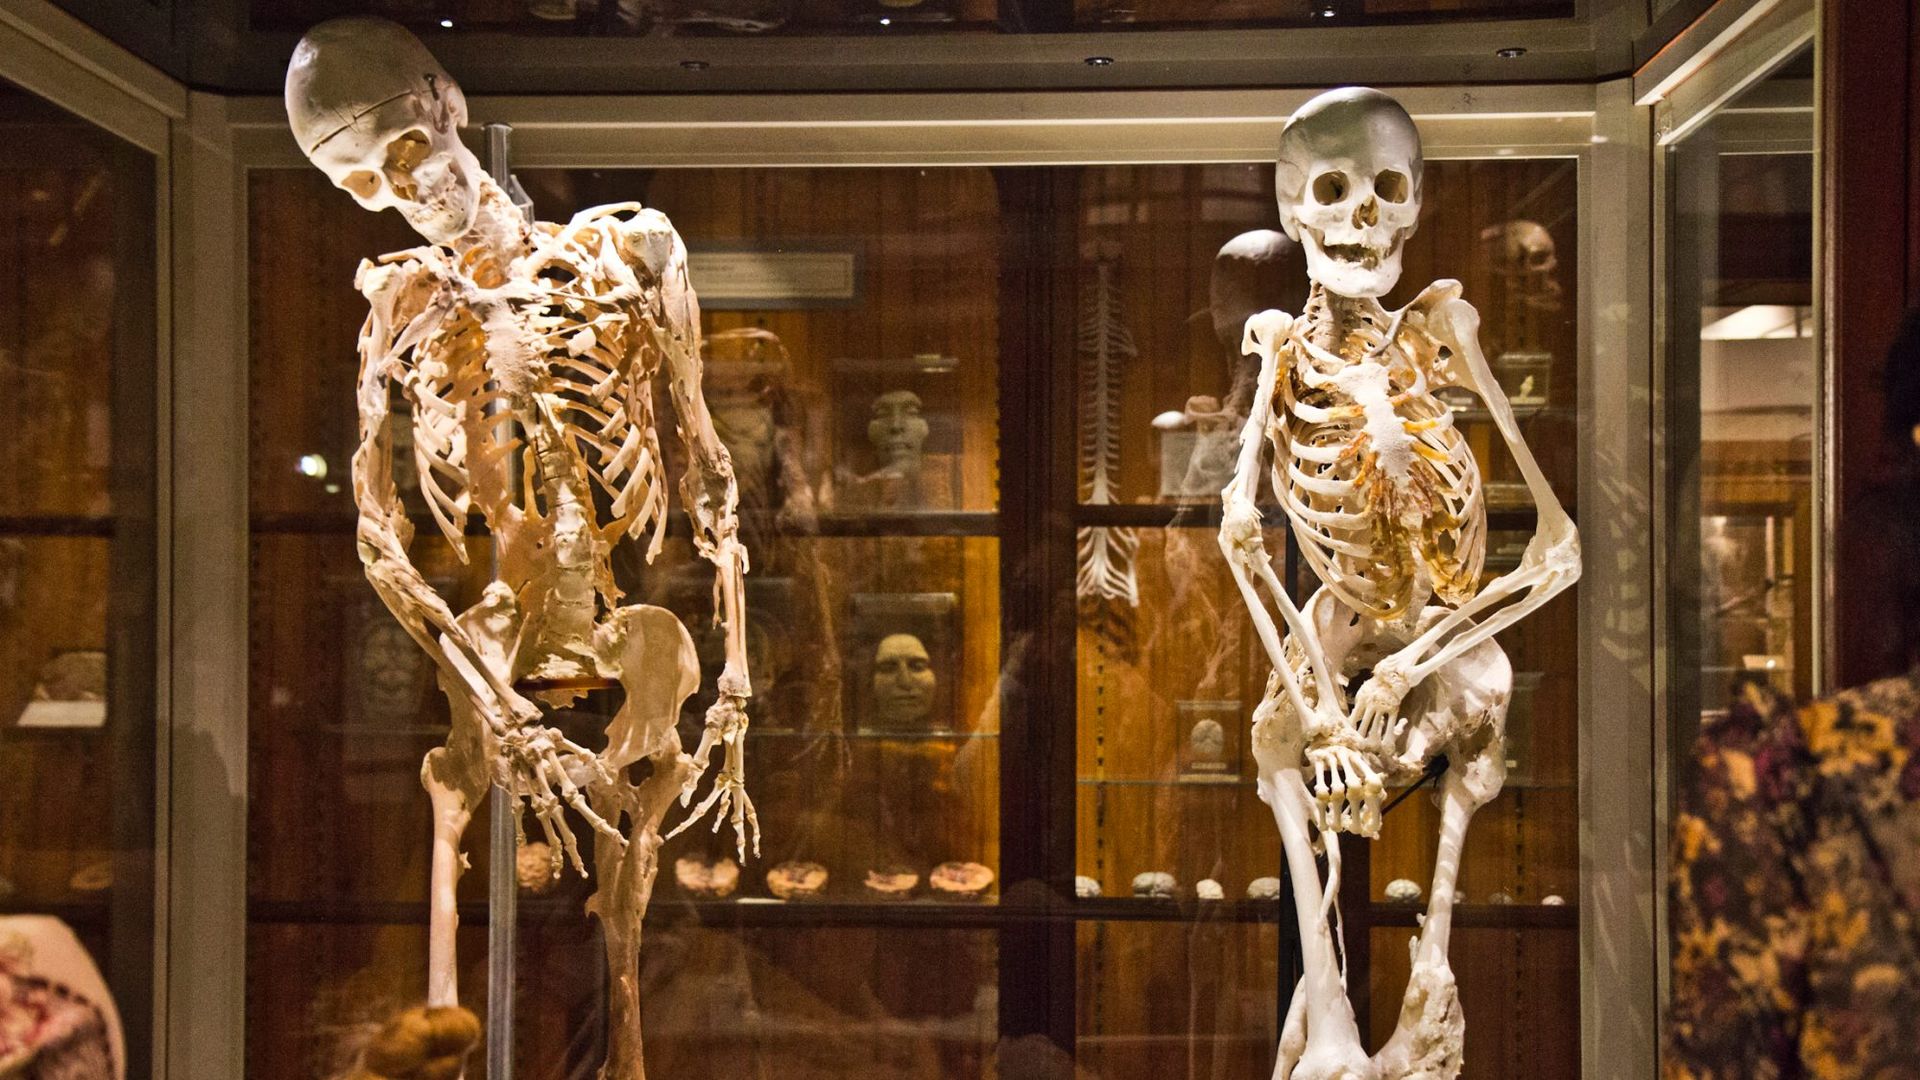 Two skeletons positioned side by side in a glass case